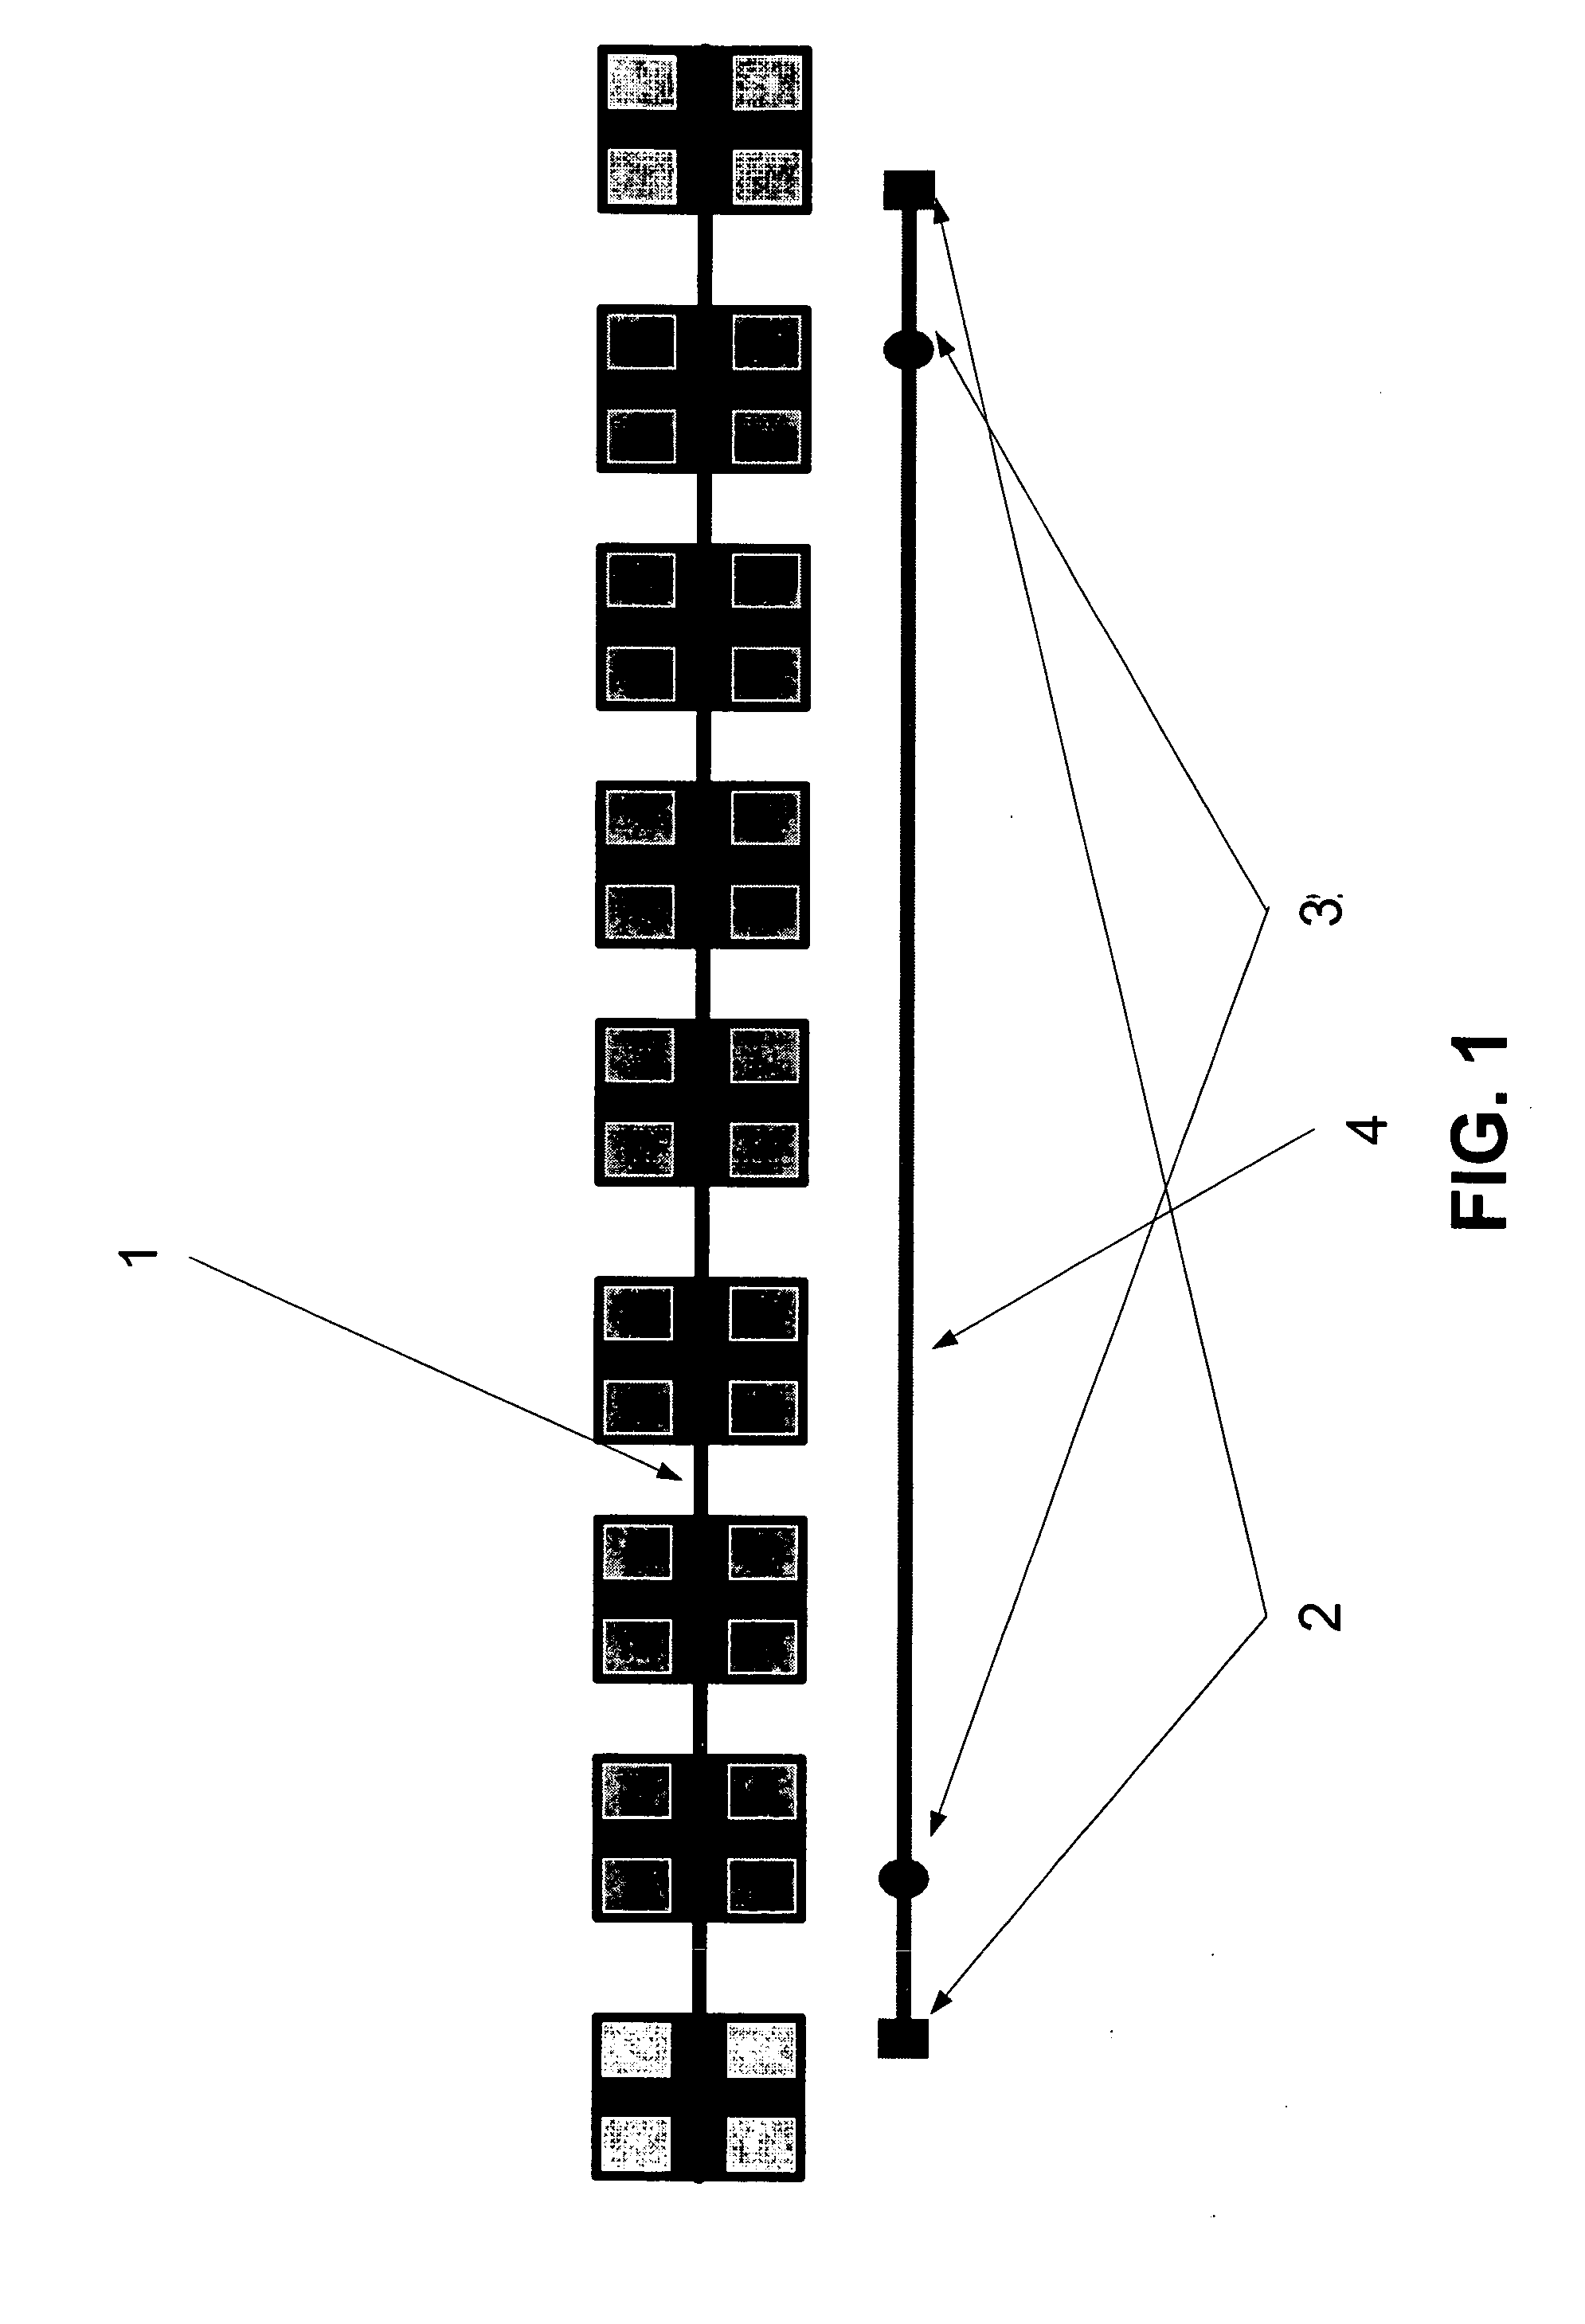 Connectivity fault management (CFM) in networks with link aggregation group connections